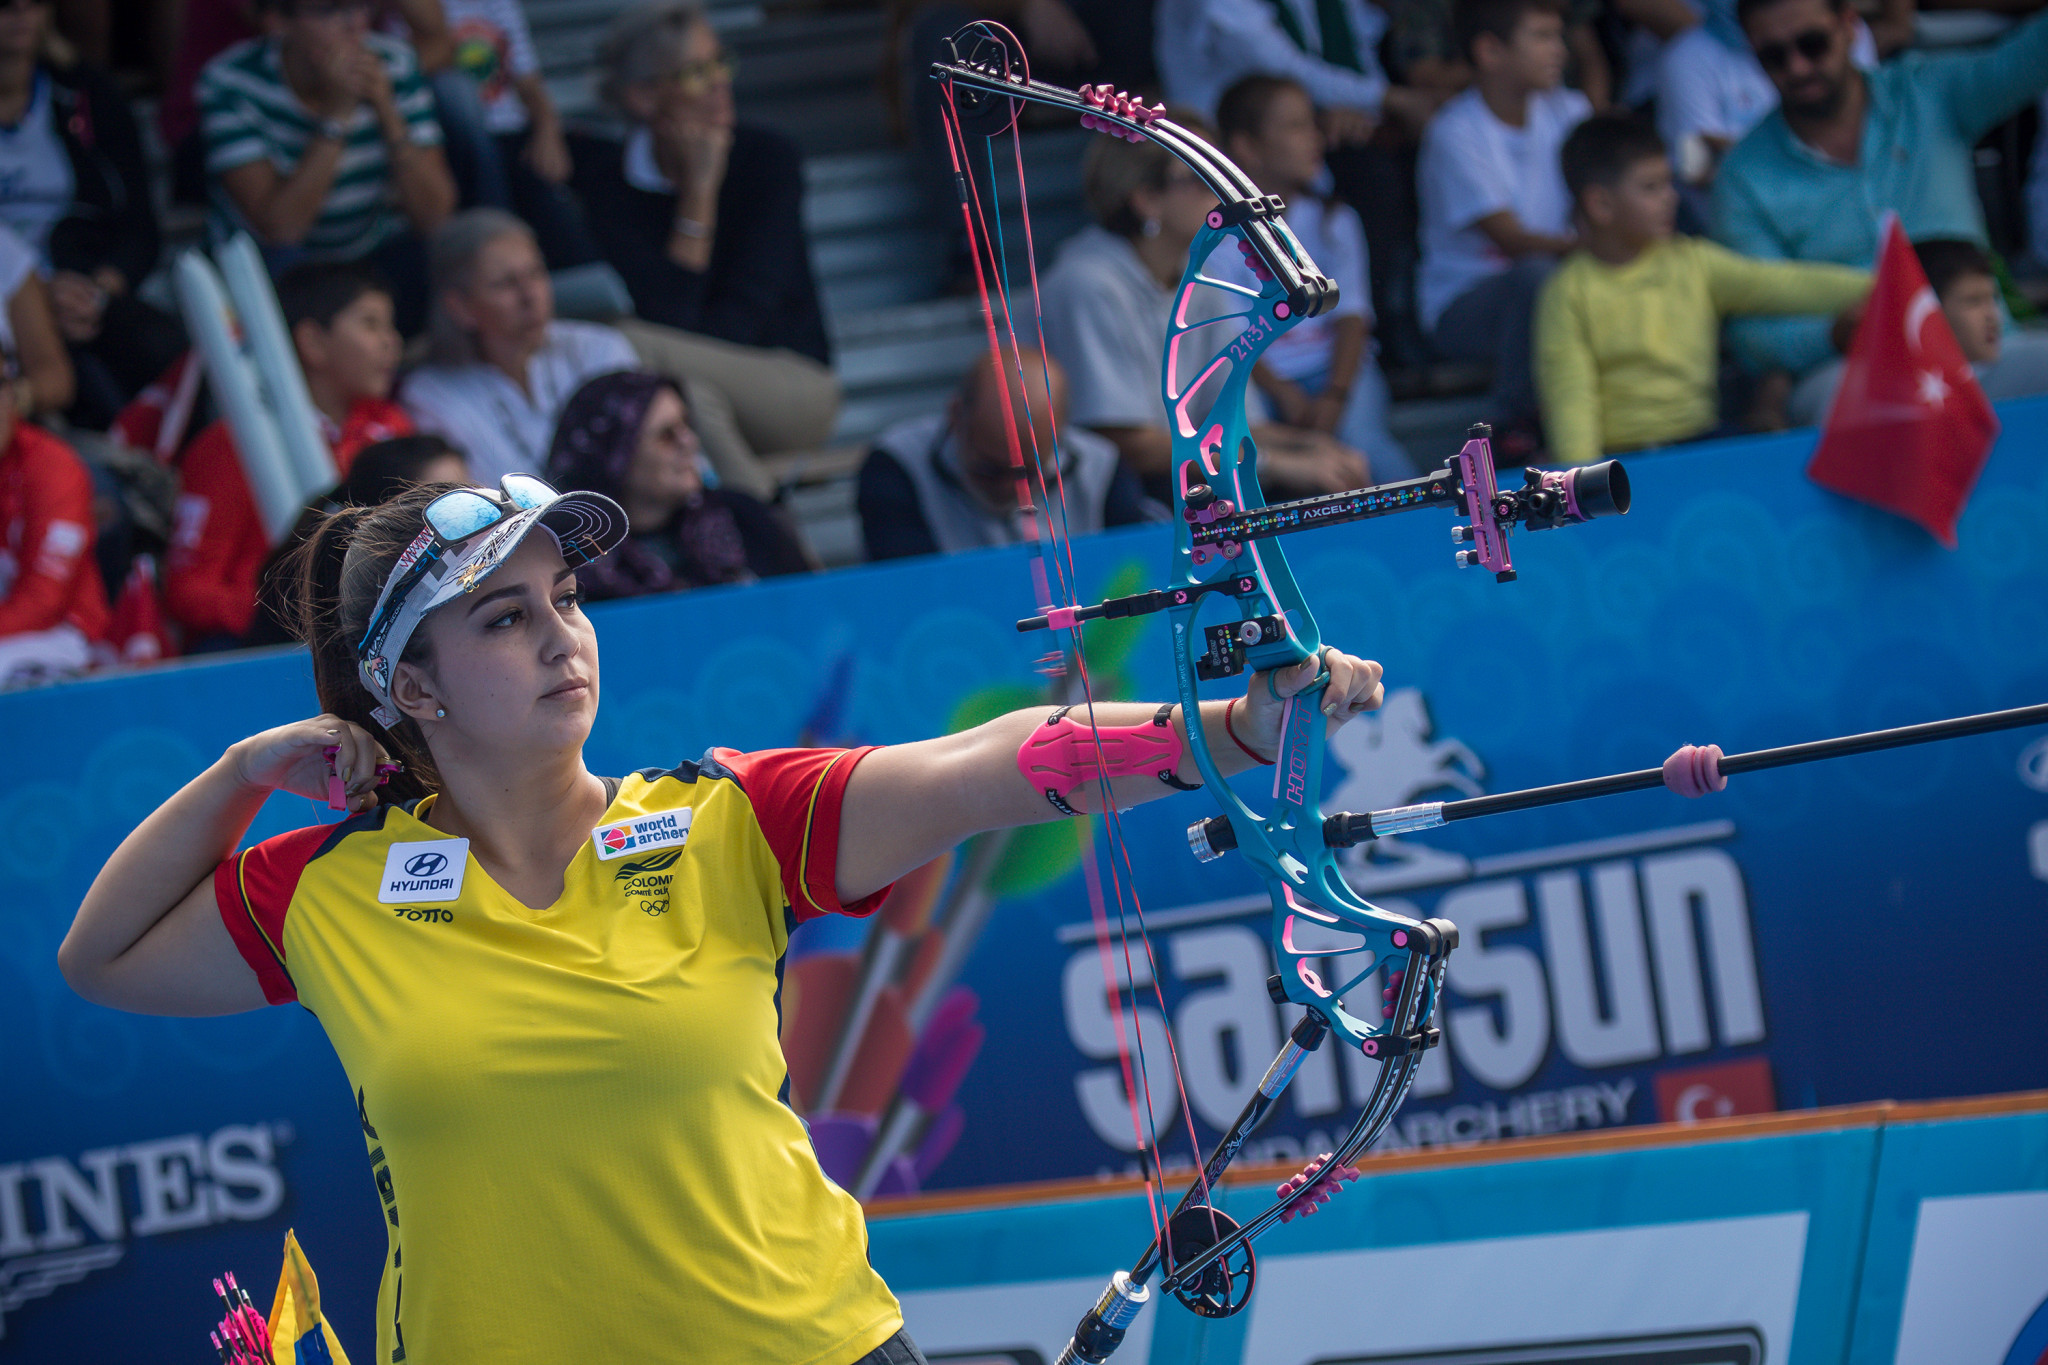 Colombia's Sara Lopez has been nominated for the World Games Athlete of the Year Award after becoming the first female archer to win the Archery World Cup Final four times ©Getty Images